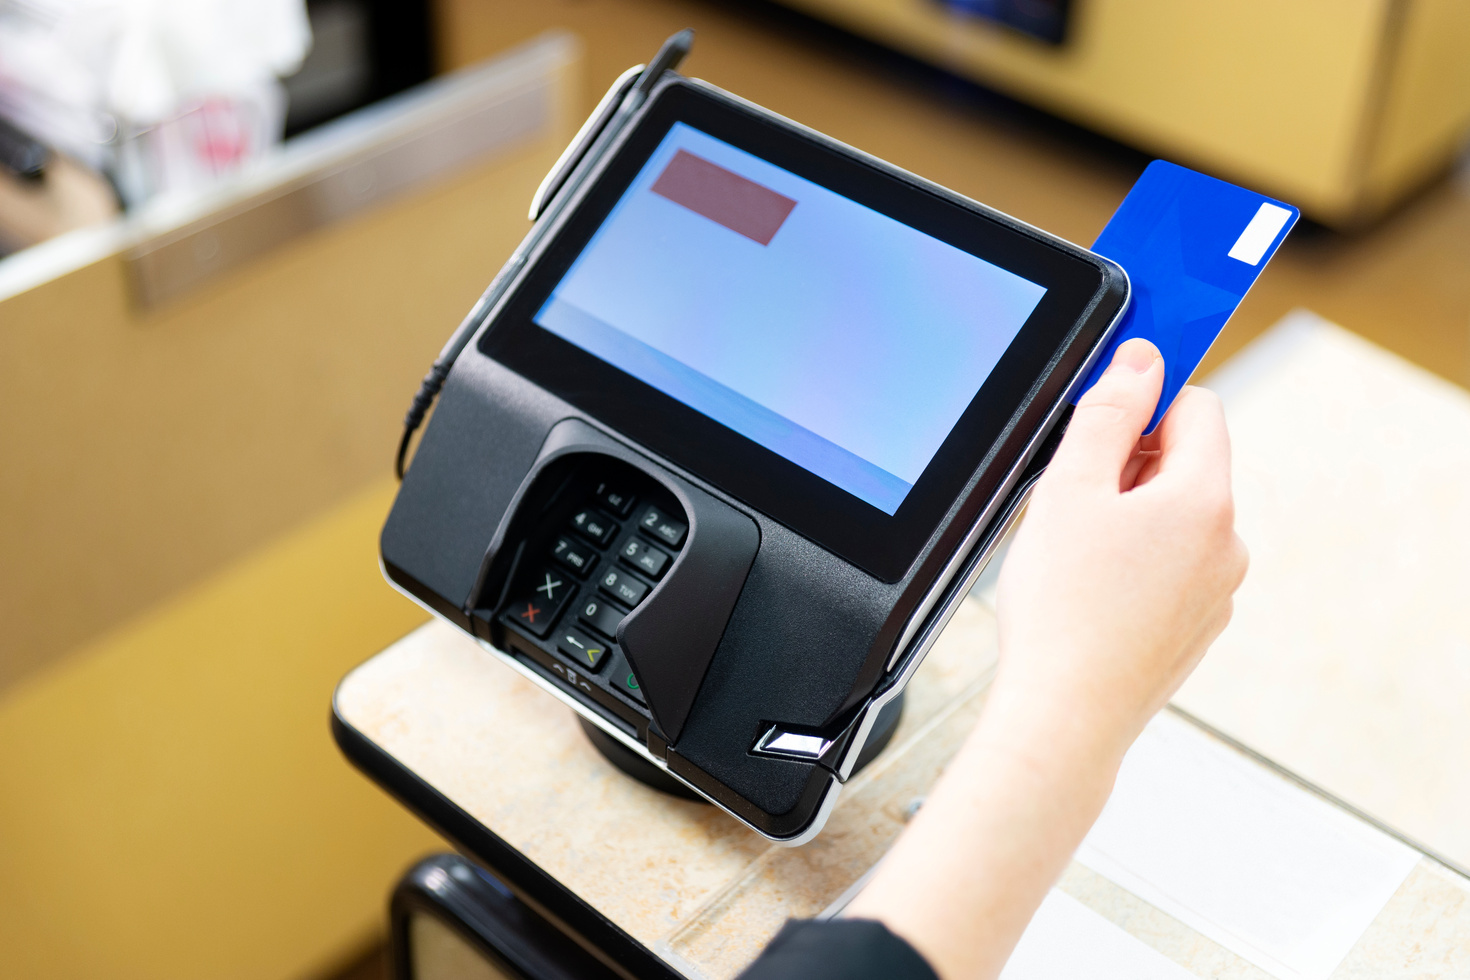 A retail point of sale credit and debit card scanner.